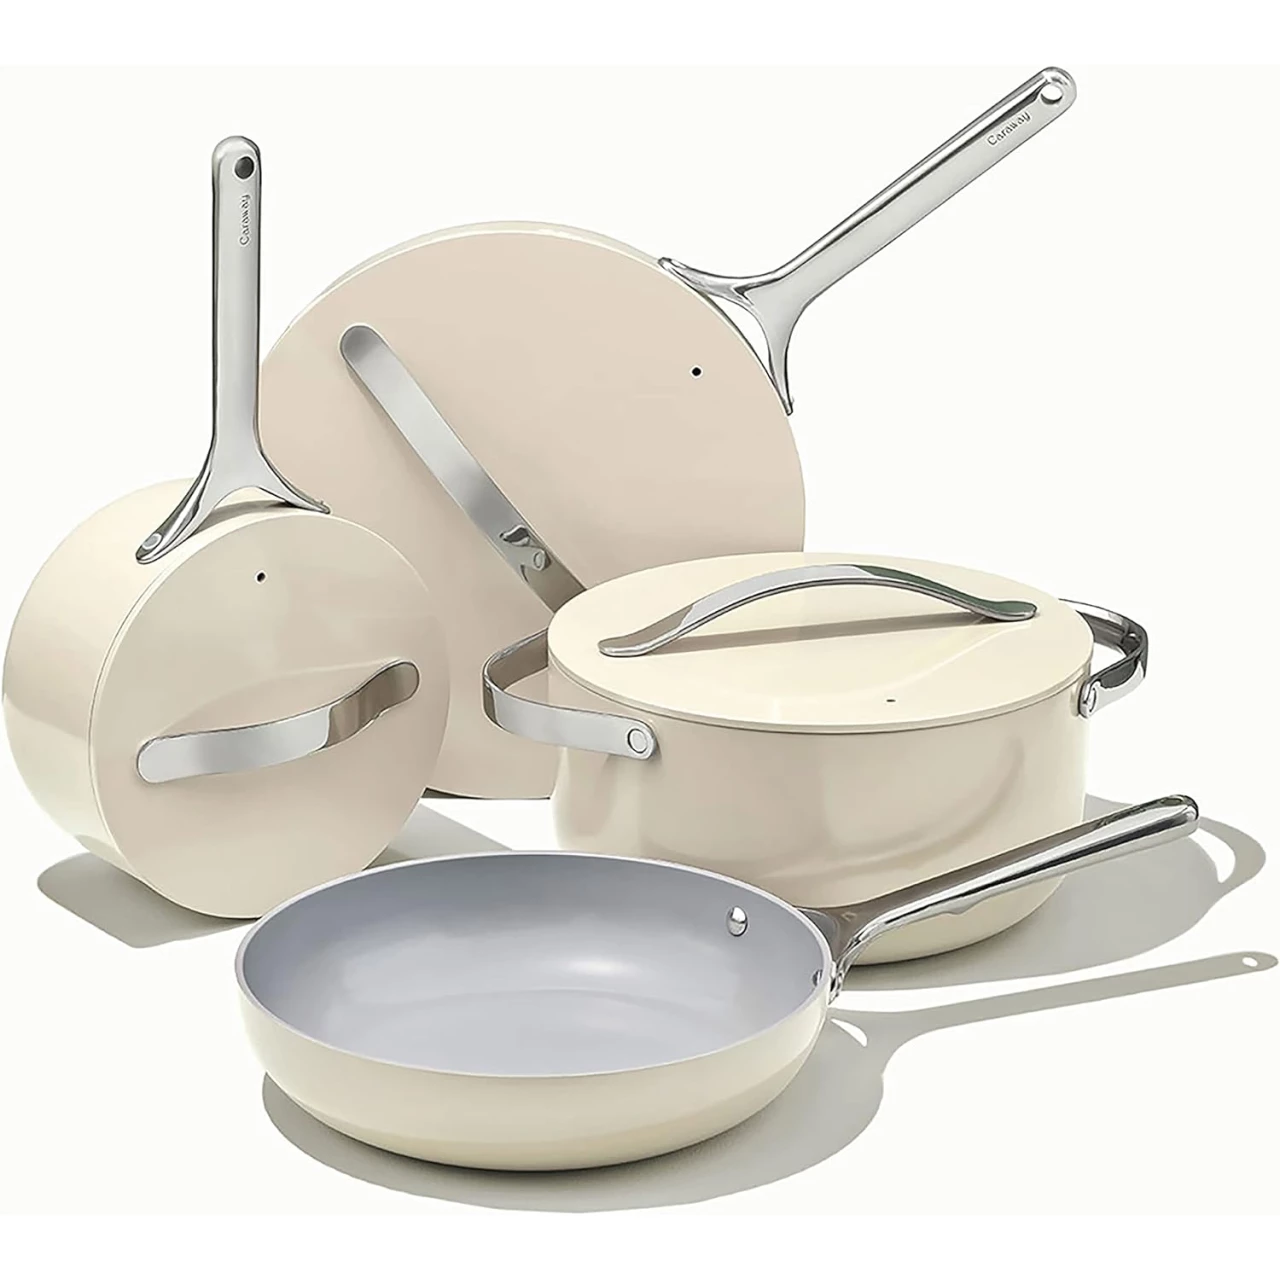 Caraway Nonstick Ceramic Cookware Set (12 Piece) Pots, Pans, Lids and Kitchen Storage - Non Toxic, PTFE &amp; PFOA Free - Oven Safe &amp; Compatible with All Stovetops (Gas, Electric &amp; Induction) - Cream